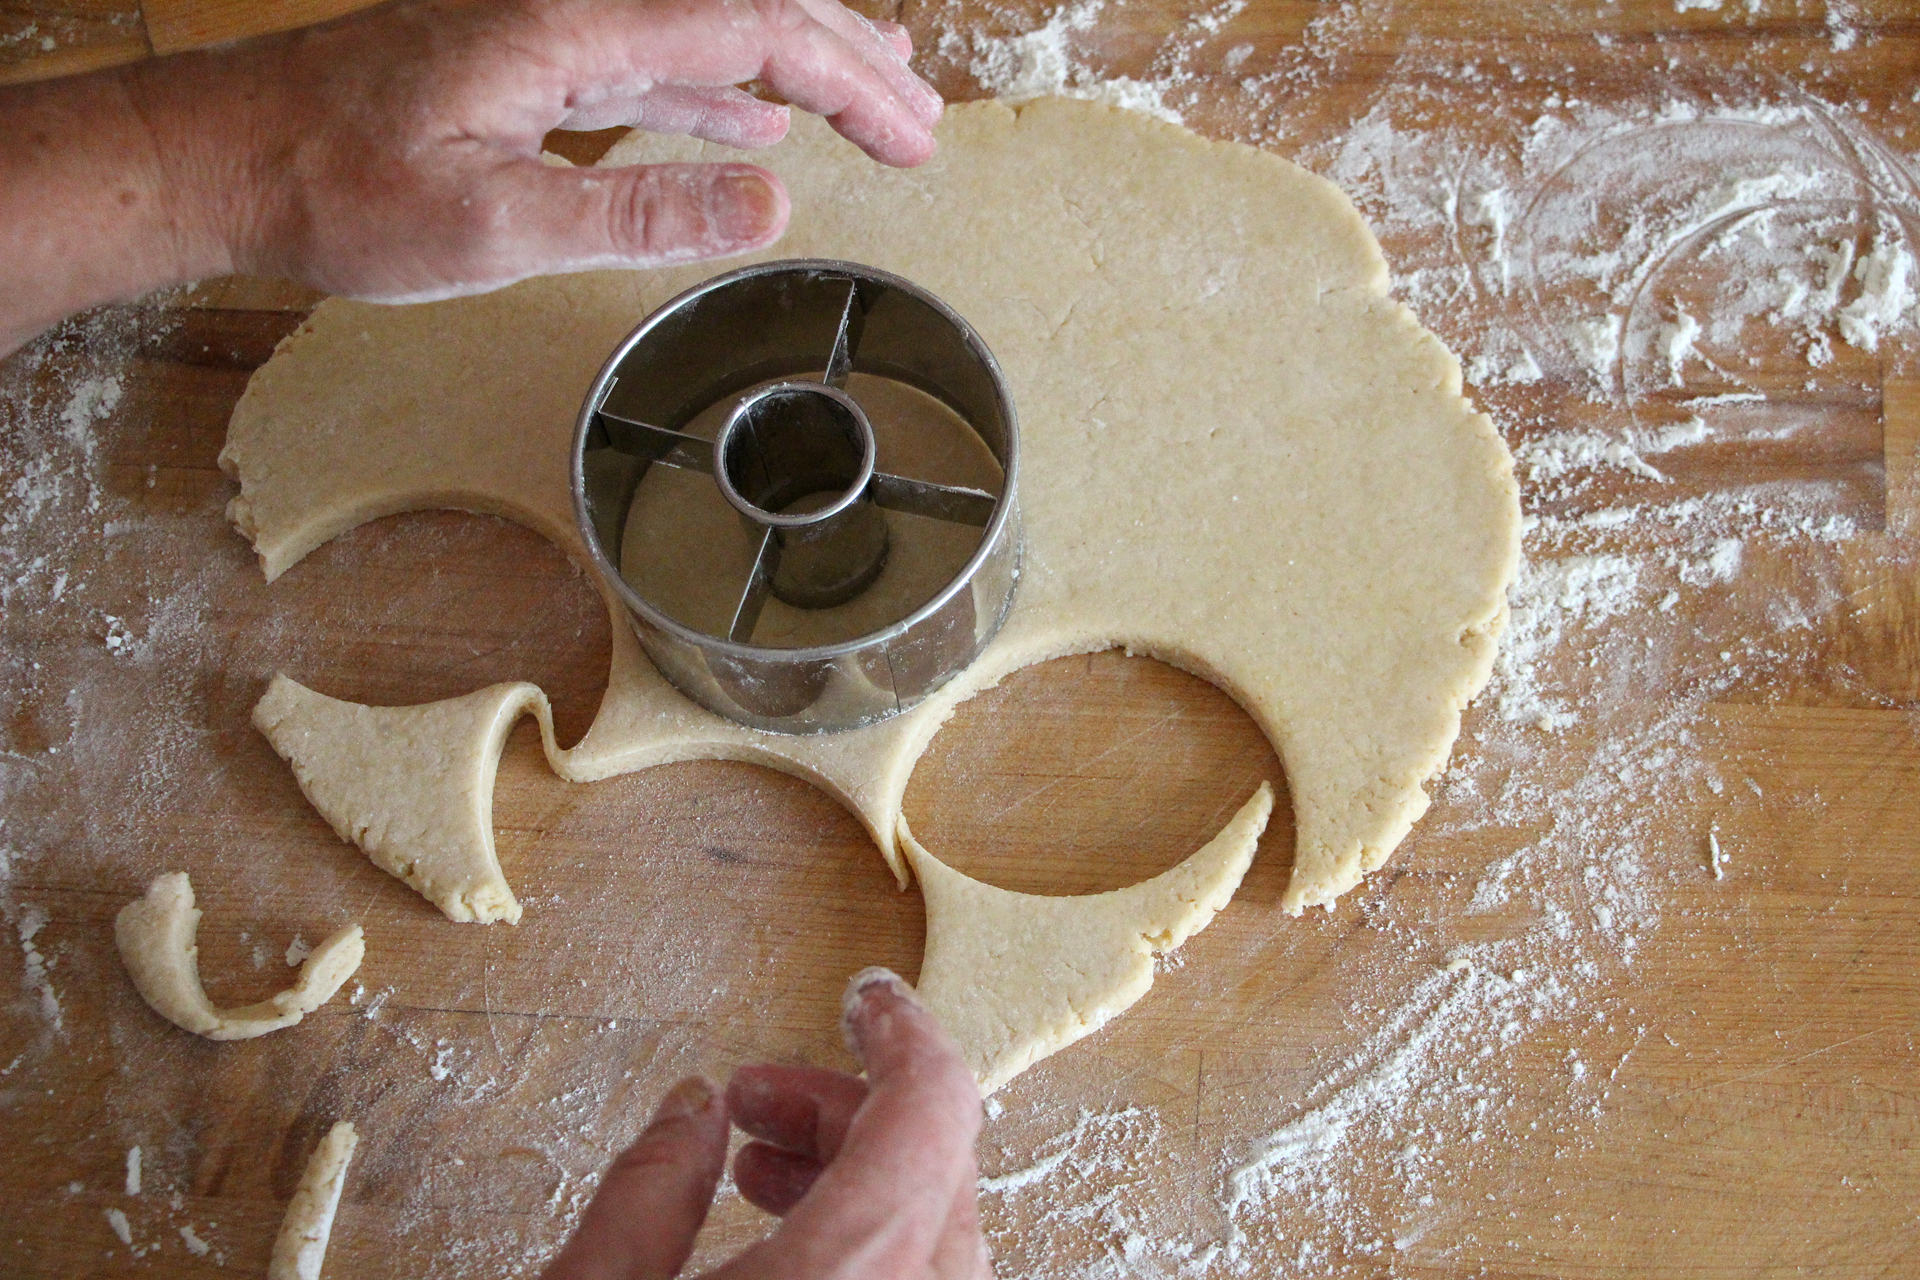 With a 3-inch-diameter donut cutter, cut out donuts and holes.